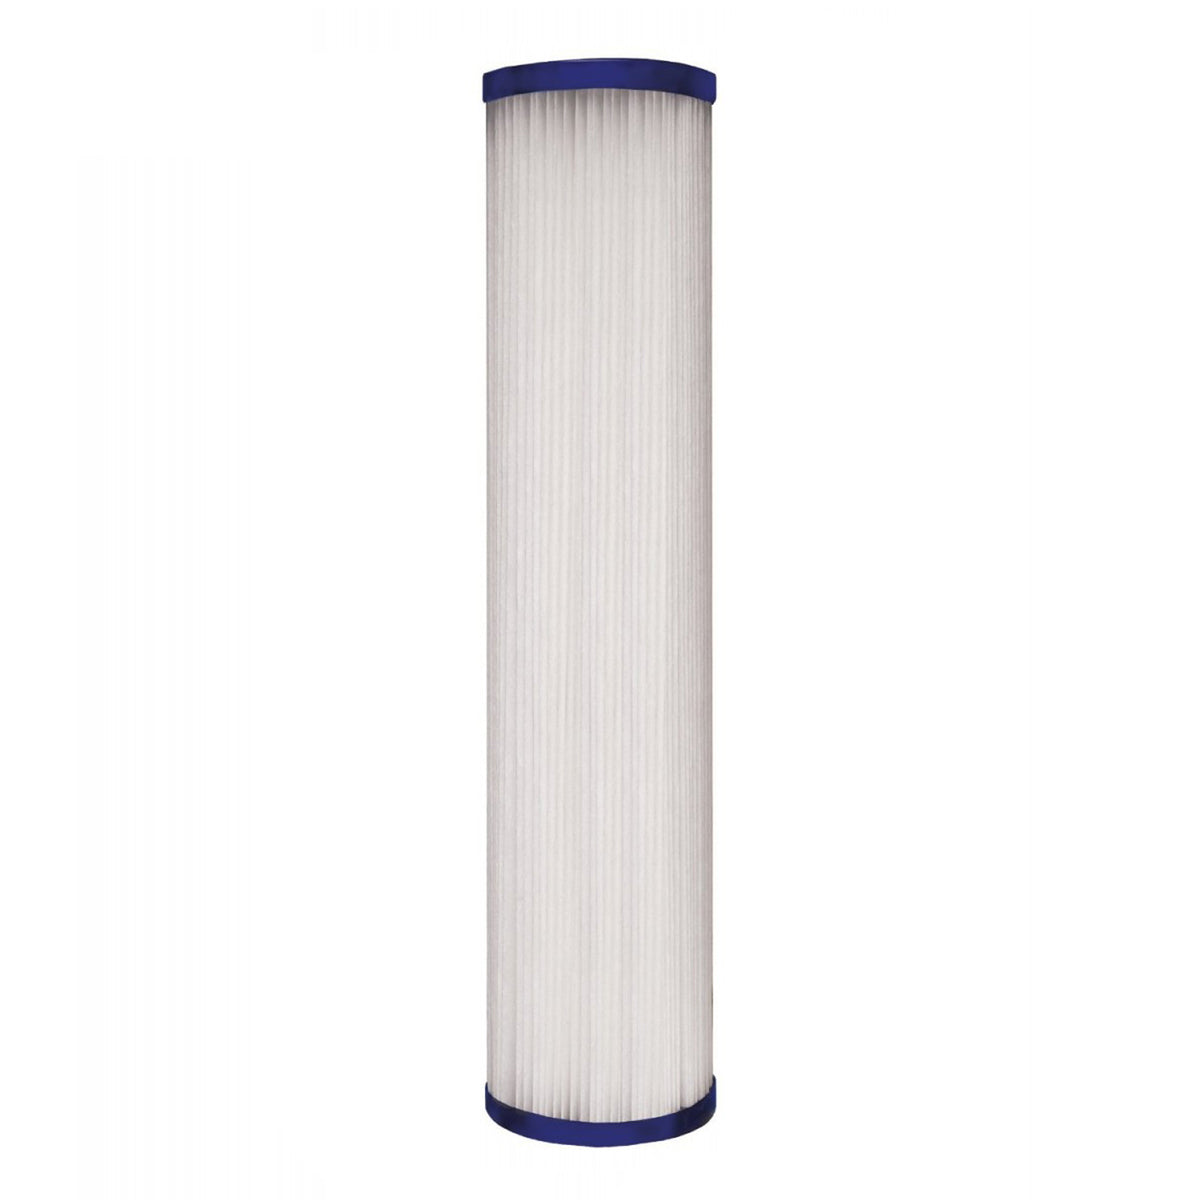 10 X 2.5 Pleated Polyester Replacement Filter by Tier1 (30 micron)